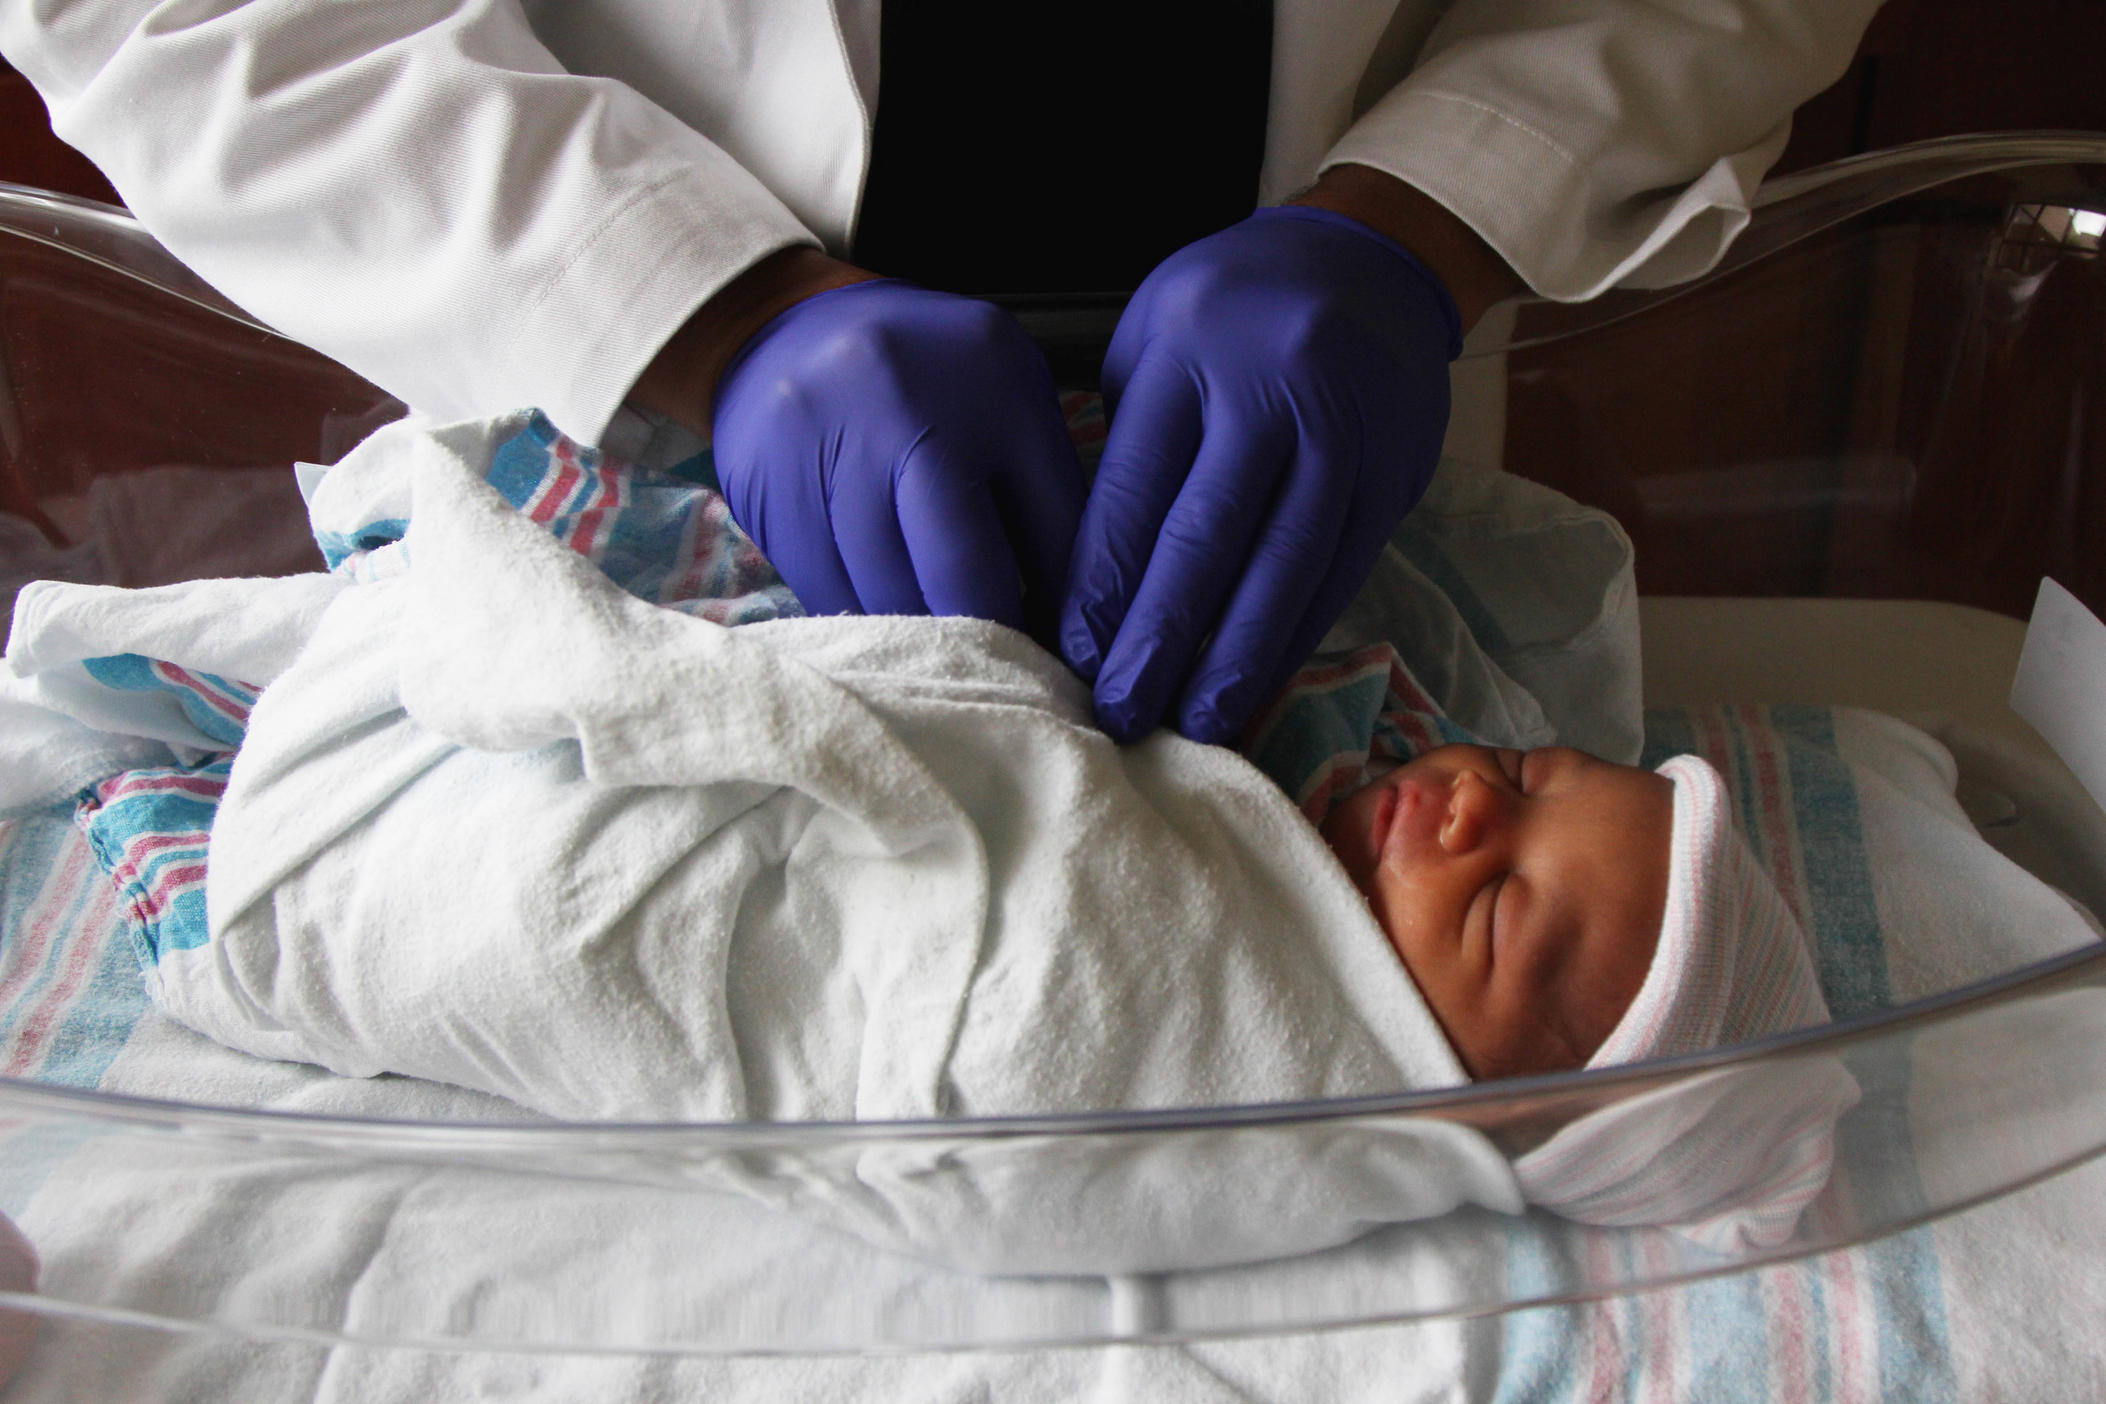 Second-year family medicine resident Rickey Patel performs a hearing exam on a newborn at Colquitt Regional Medical Center in Moultrie, GA, on June 25, 2022. Doctors in unopposed residency programs, meaning they're the only residents at the hospital, often have more opportunities to work closely with patients and attending physicians.